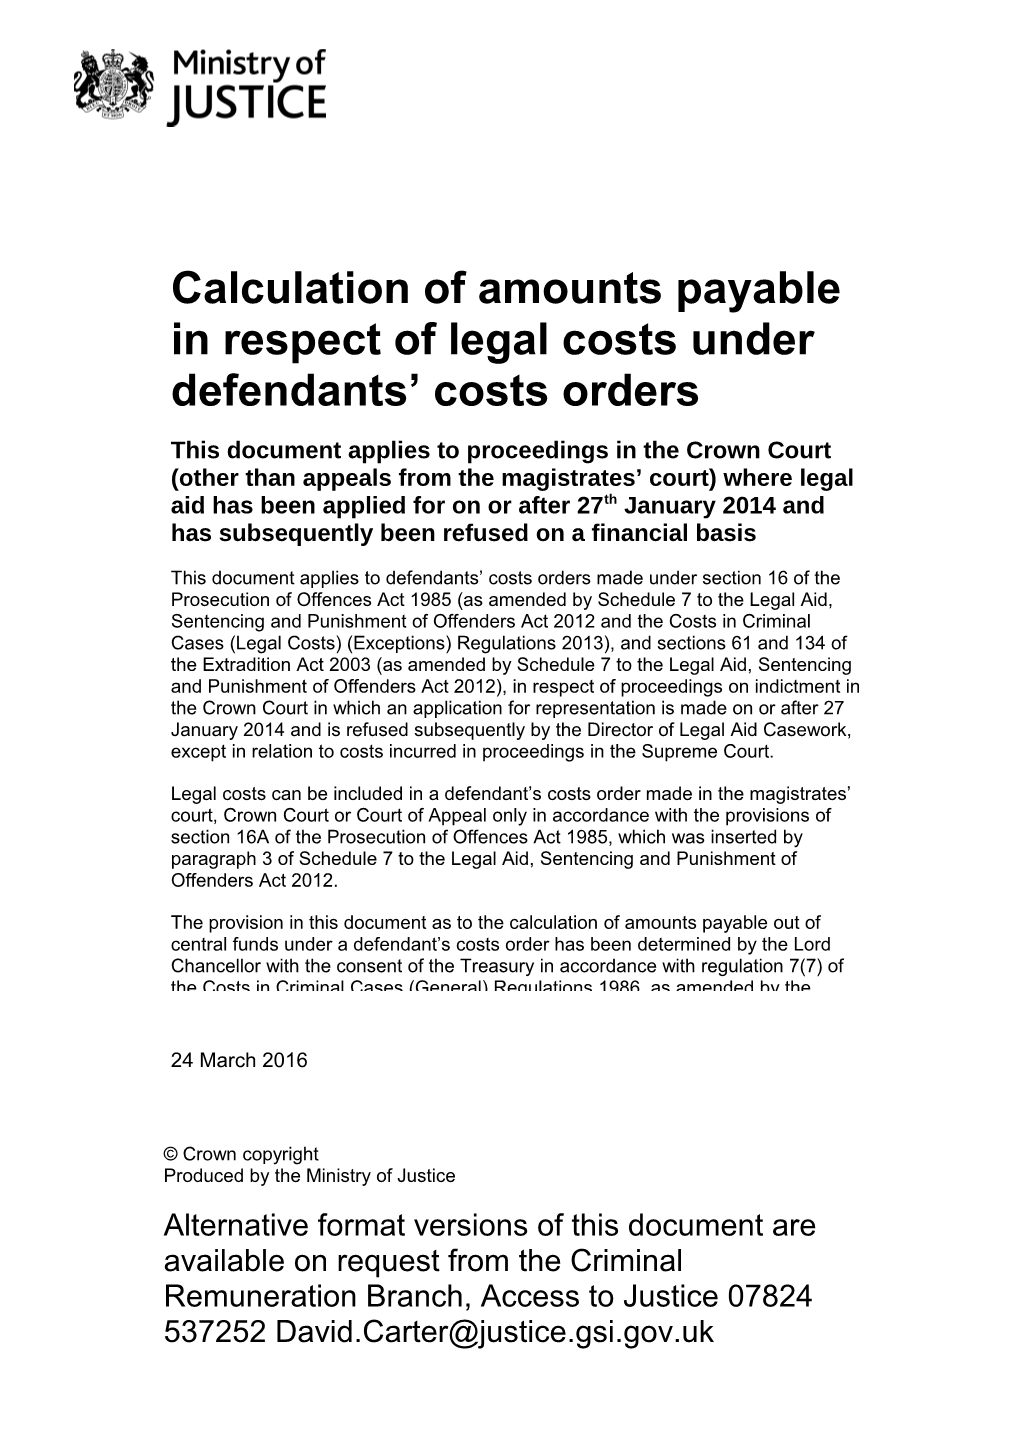 Rates and Scales in Respect of Defendant's Costs Orders